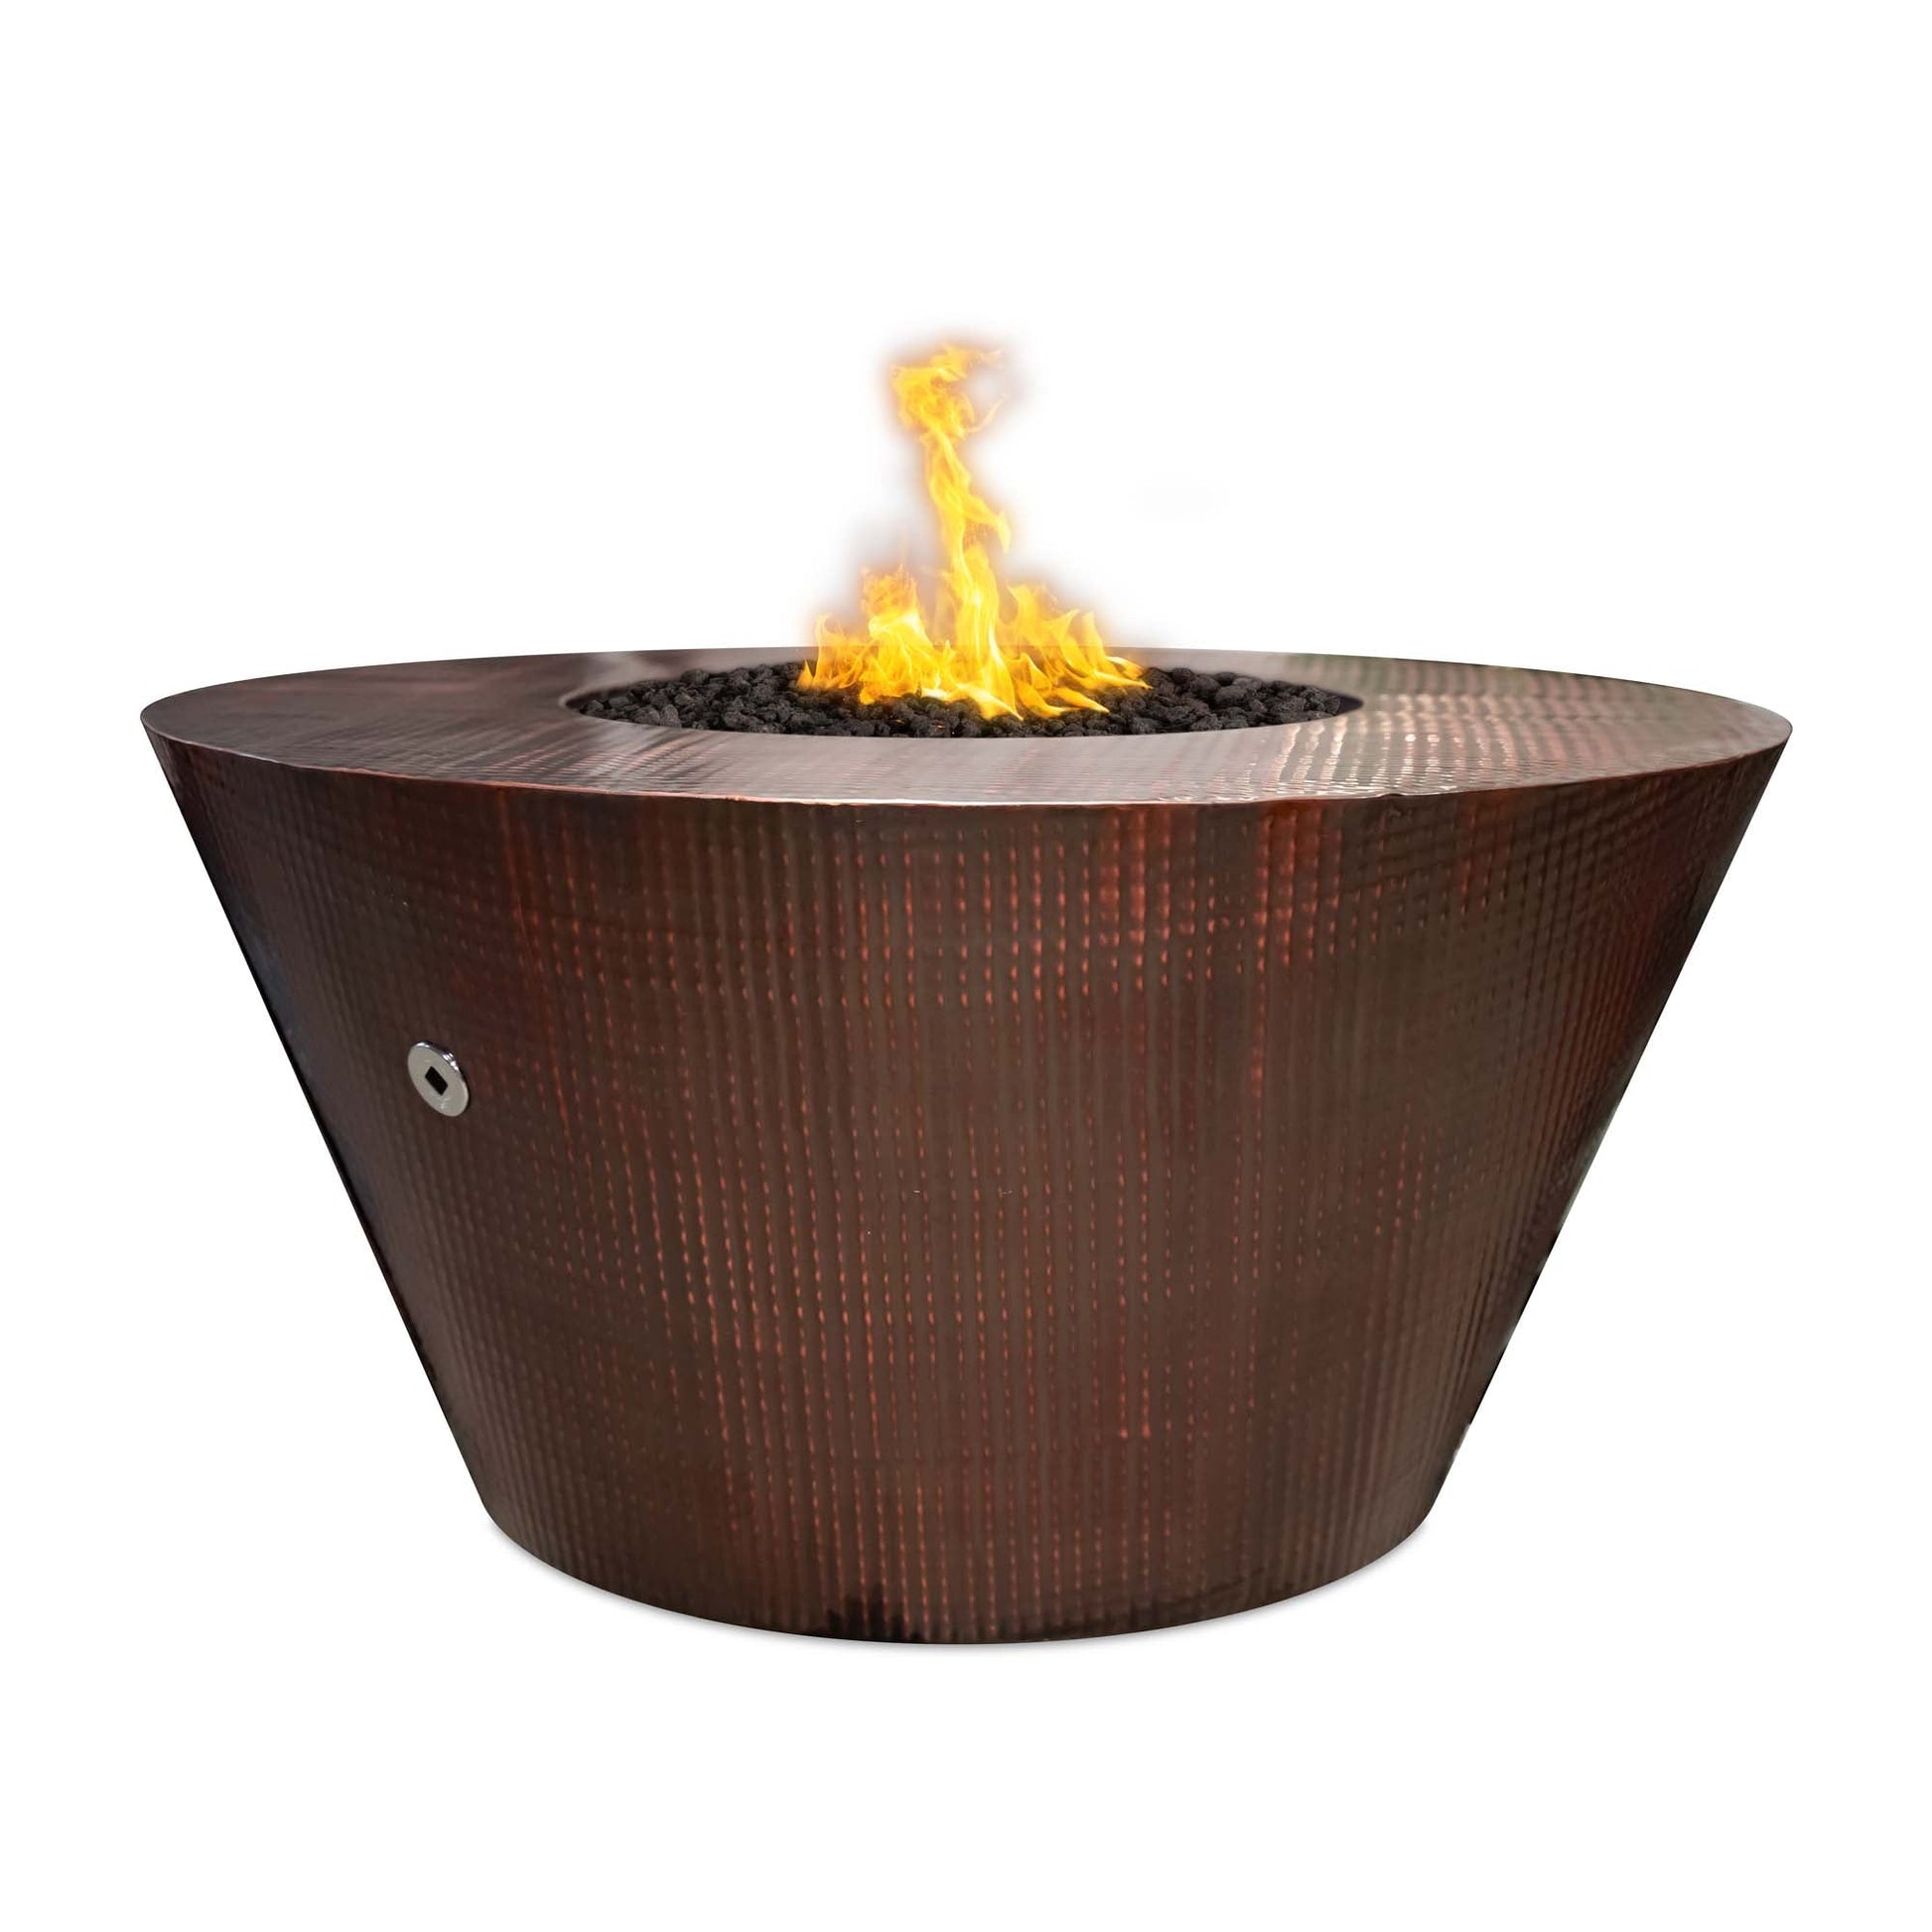 The Outdoor Plus Round Martillo 48" Corten Steel Natural Gas Fire Pit with Flame Sense with Spark Ignition